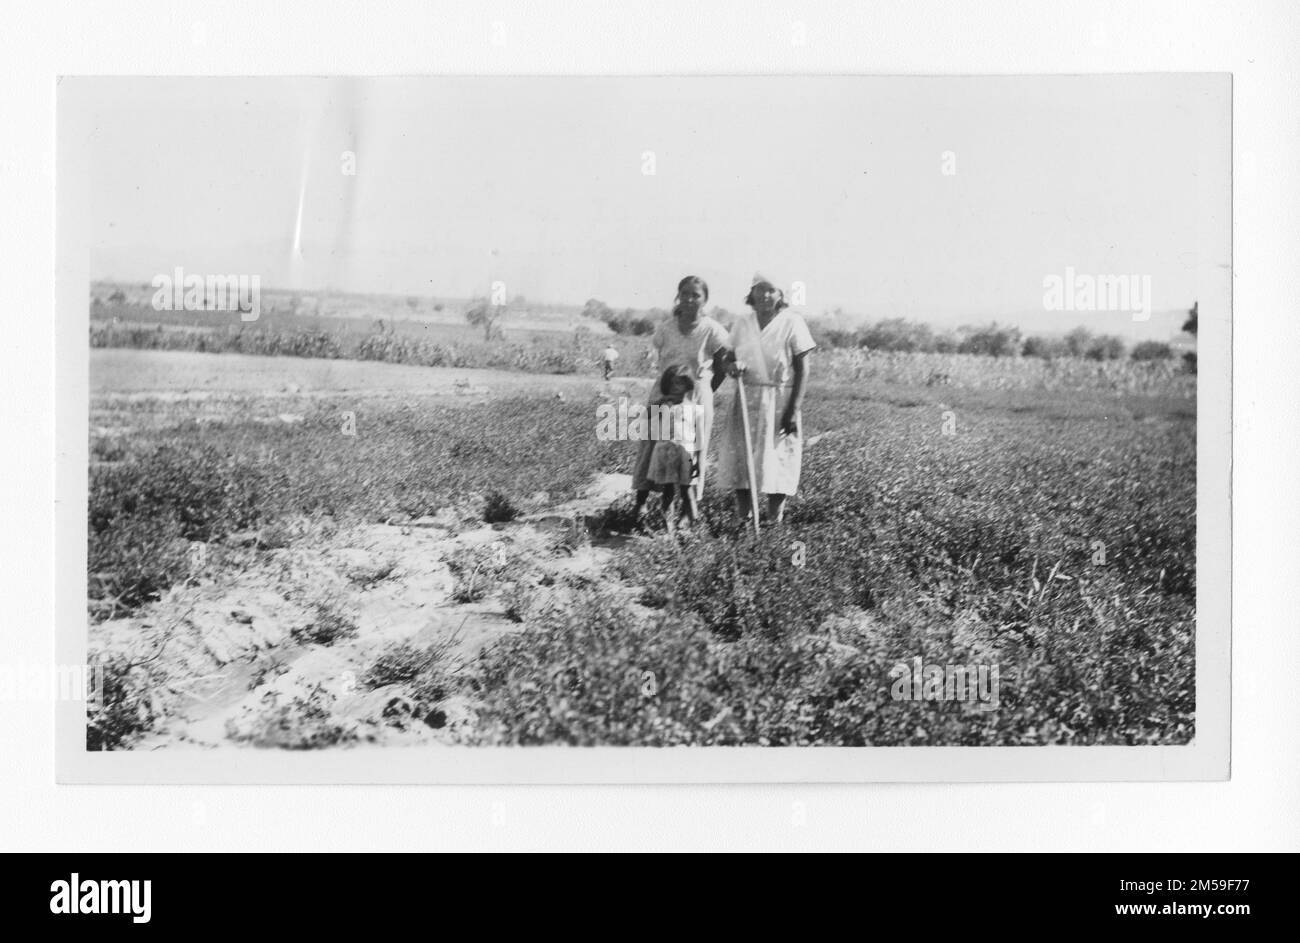 Original caption: 'Soboba - Showing a portion of the farm of Petra Arrietta at Soboba. Corn in the background, alfalfa to the left and beans and other garden produce to the left.'. 1936 - 1942. Pacific Region (Riverside, CA). Photographic Print. Department of the Interior. Office of Indian Affairs. Mission Agency. 11/15/1920-6/17/1946. Photographs Stock Photo